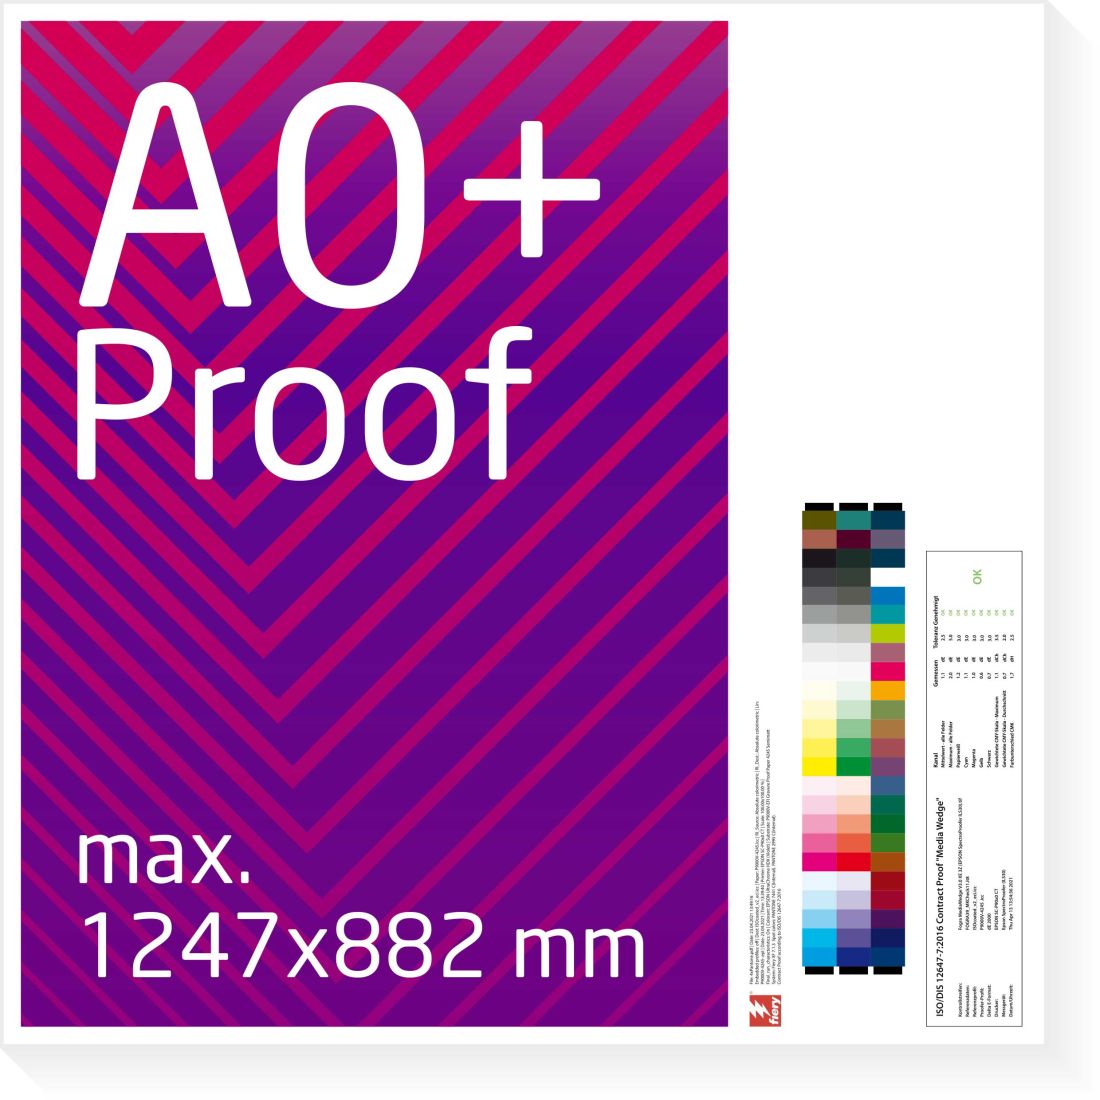 A0+ Proof colour binding Digital Online Proof